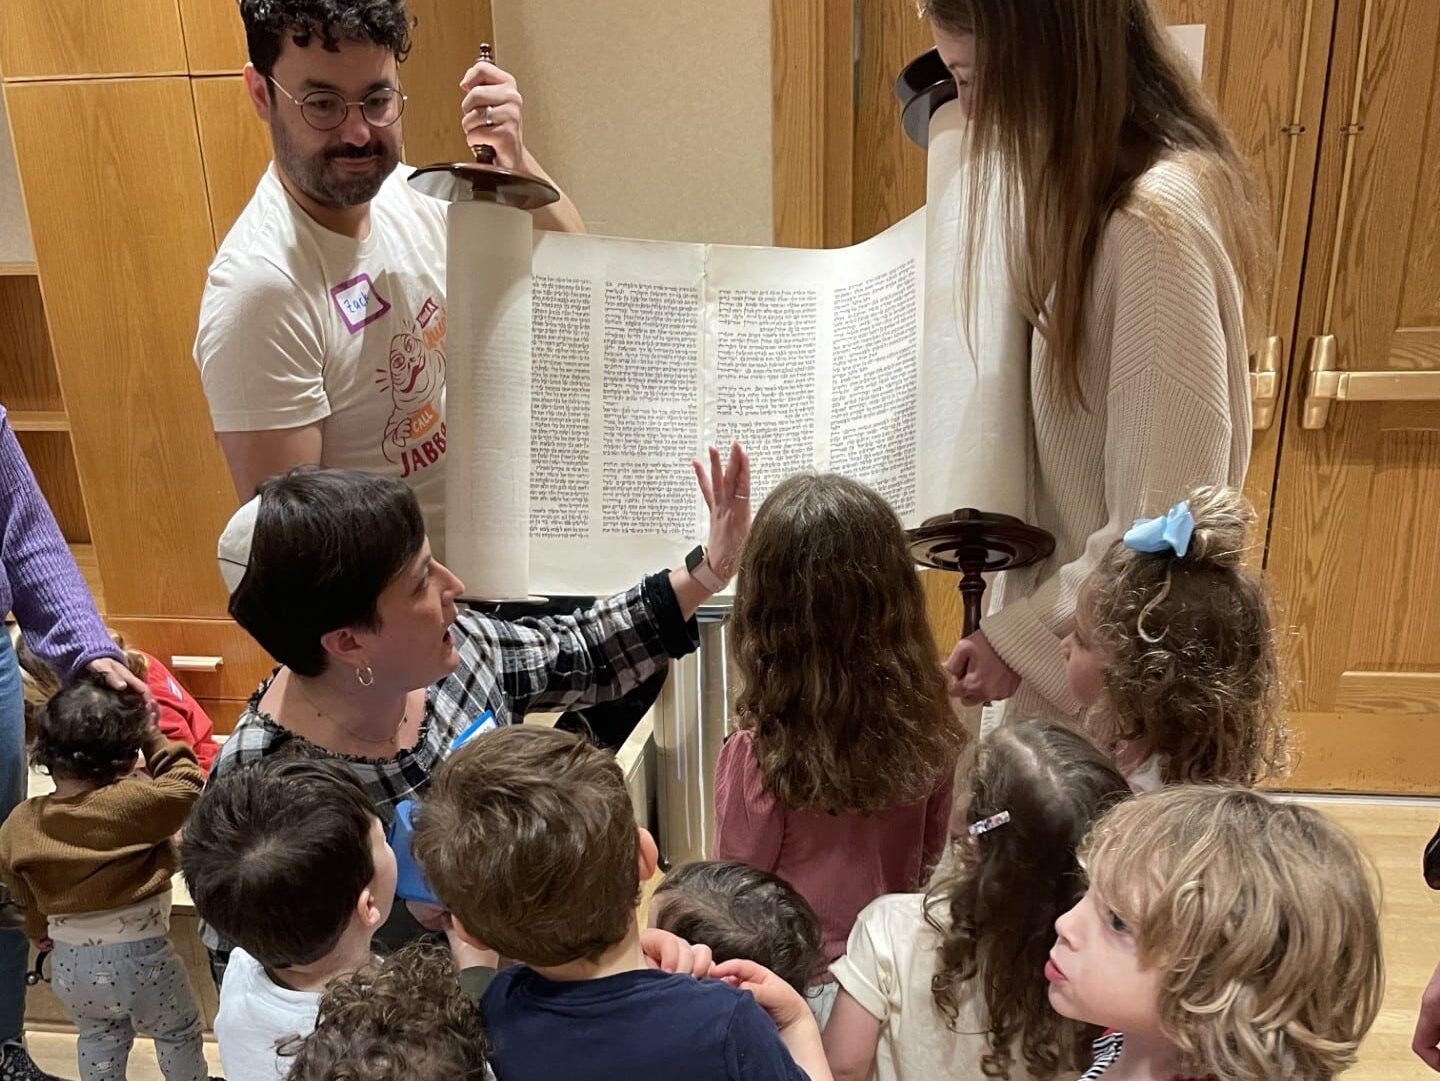 Rabbi Fischel shows a group of young children the Torah that two parents are holding open